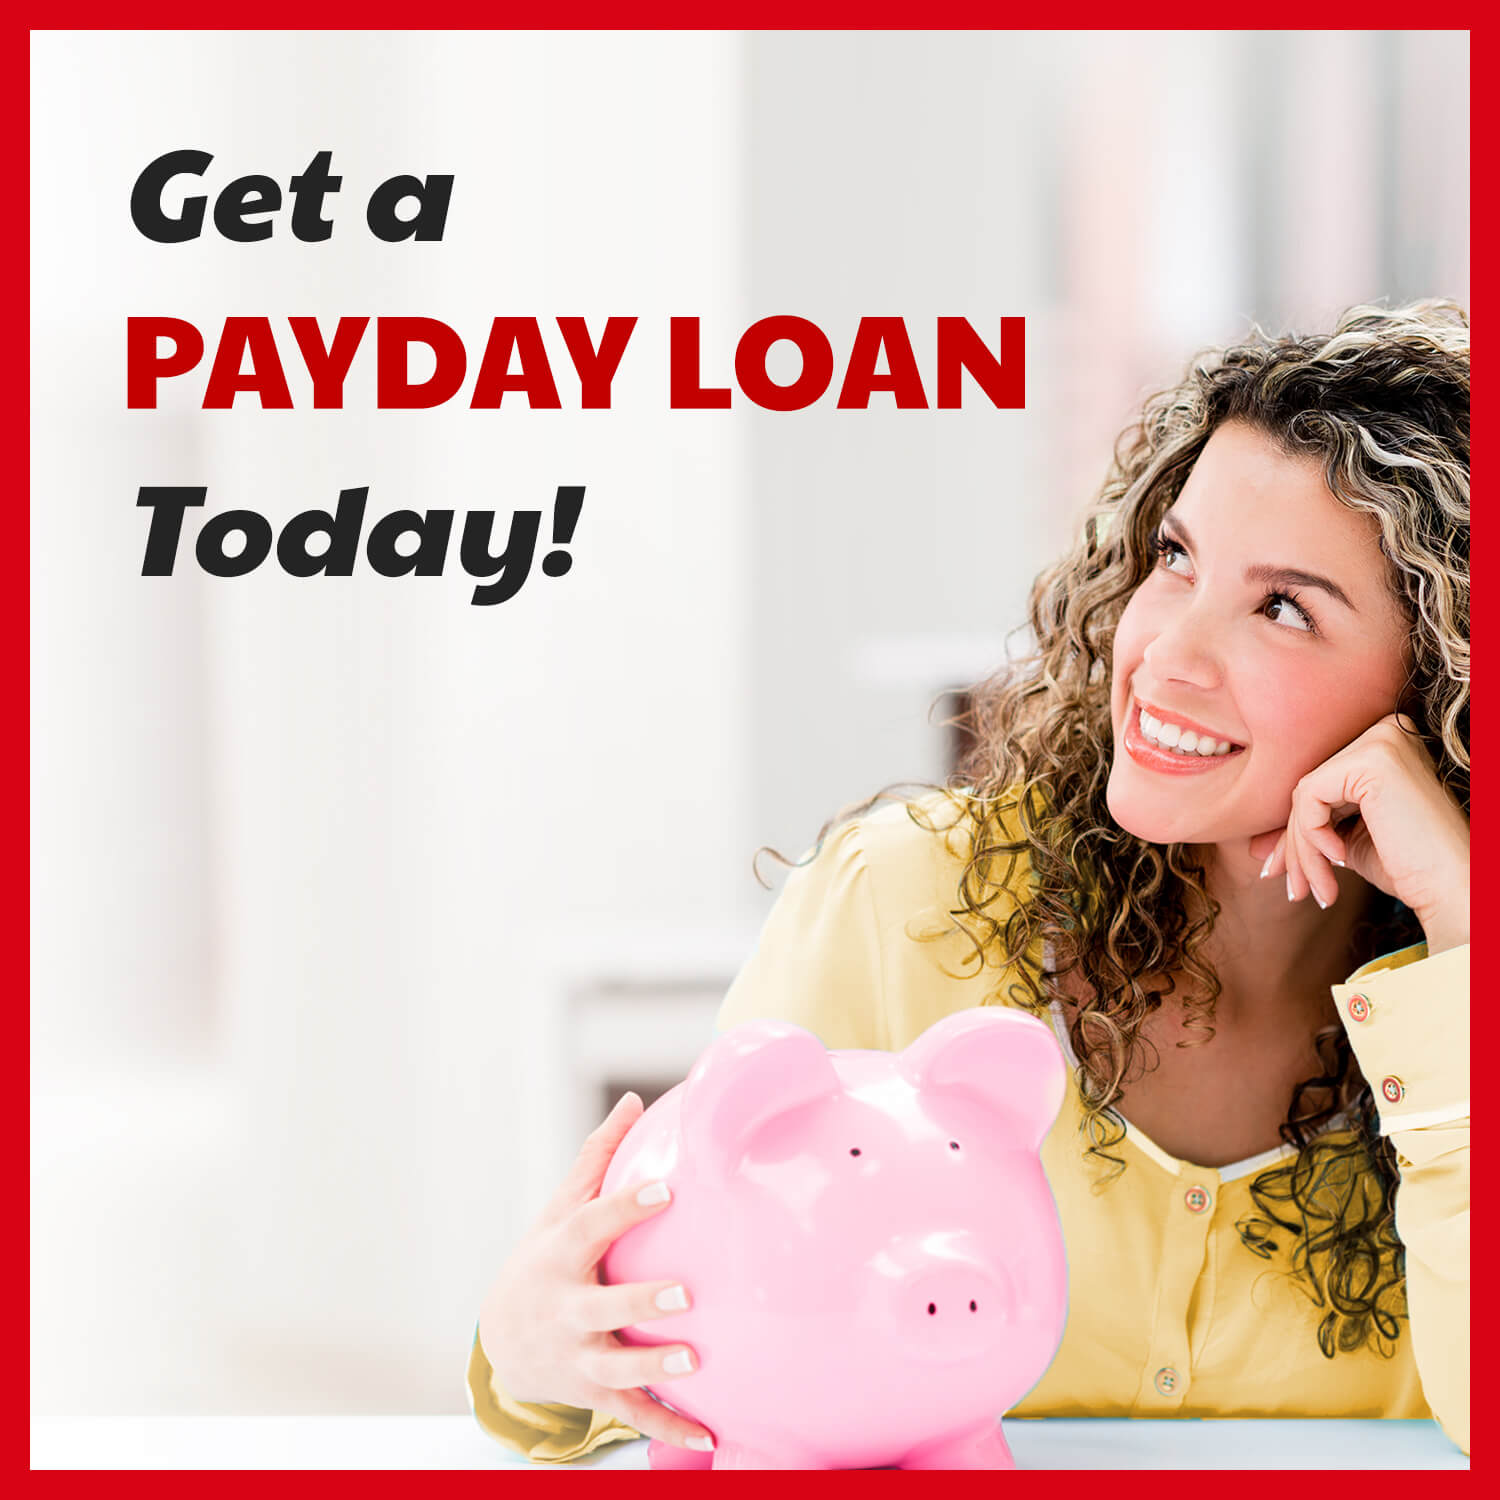 payday loans requirements and process